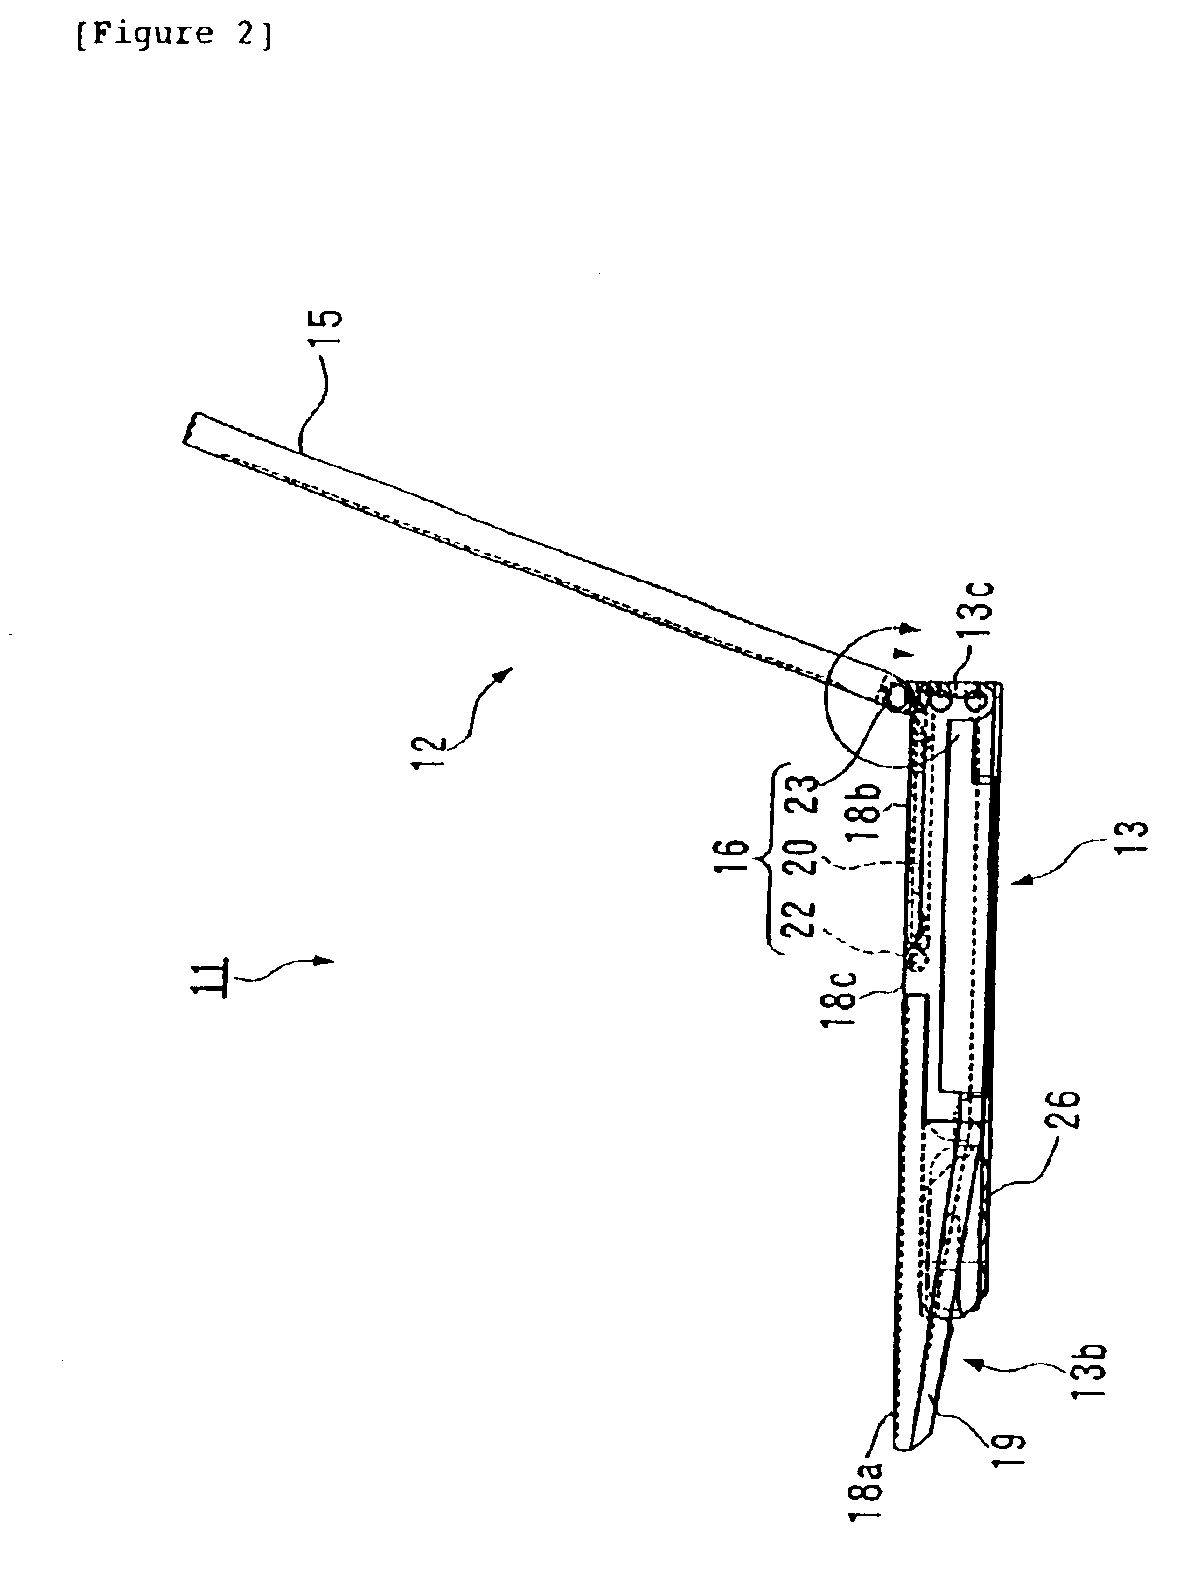 Personal computer device having constant tilt display with adjustable height